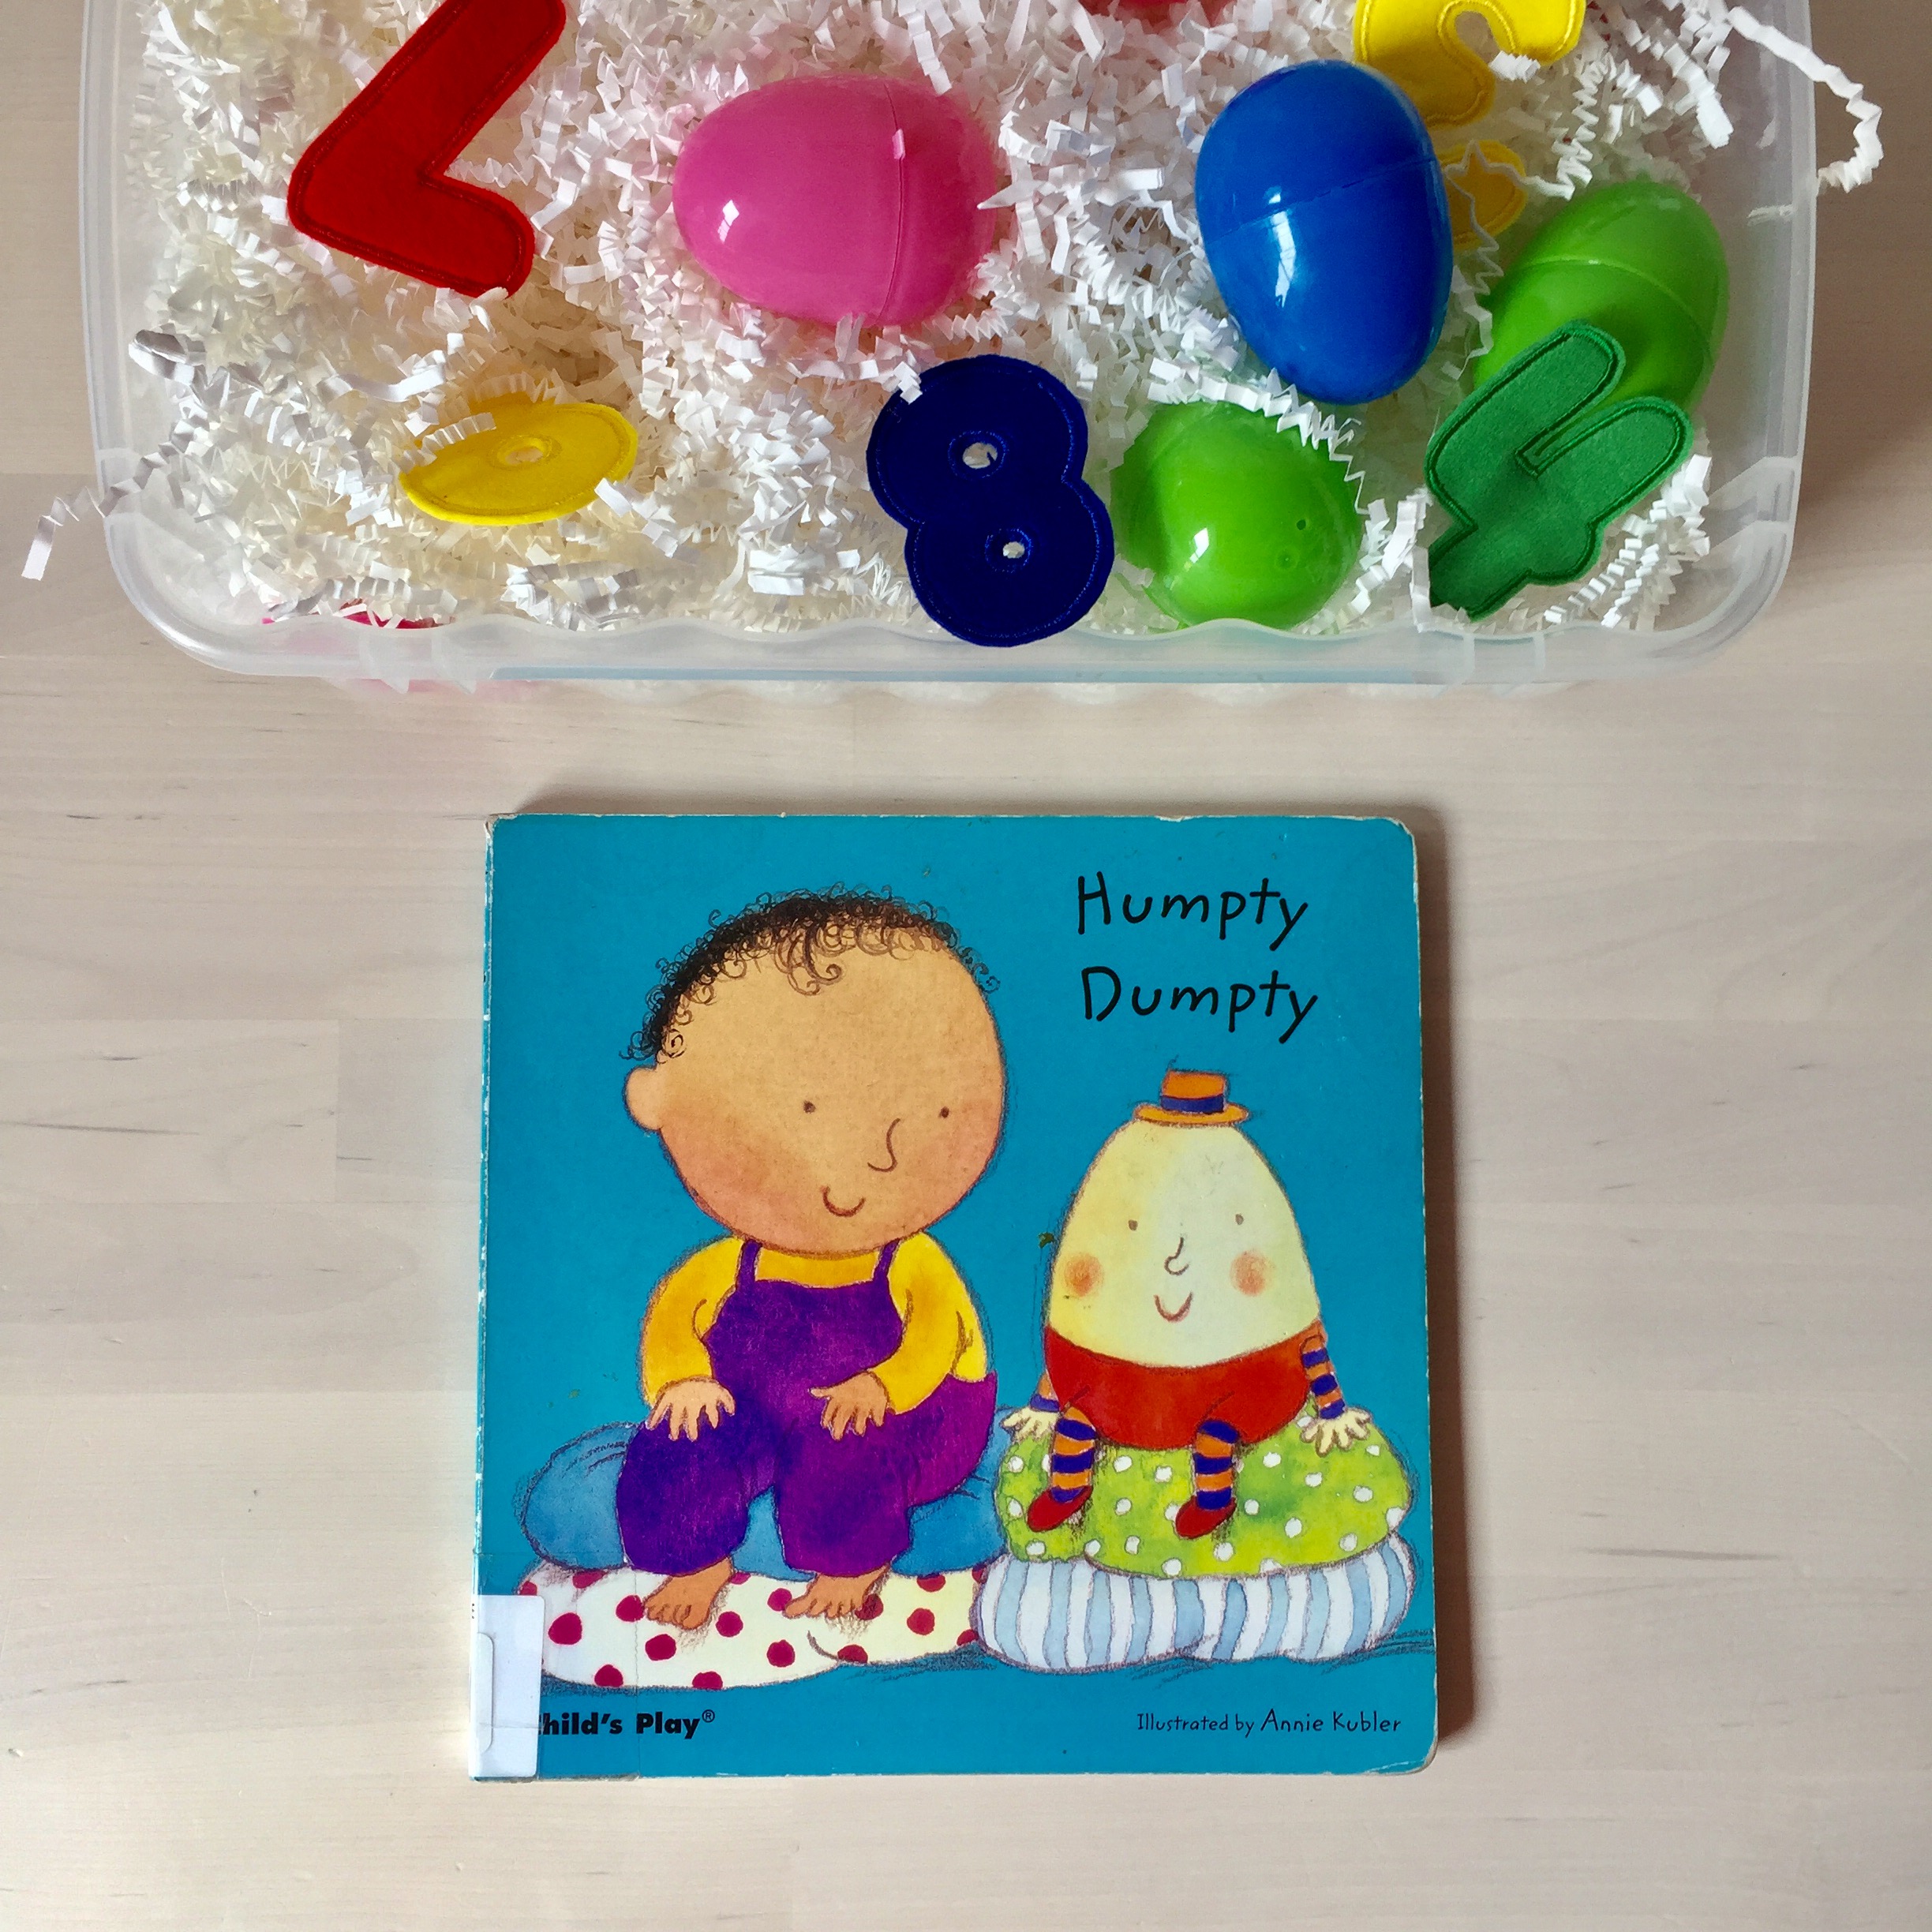 humpty dumpty storytime and sensory bin story time for babies and toddlers